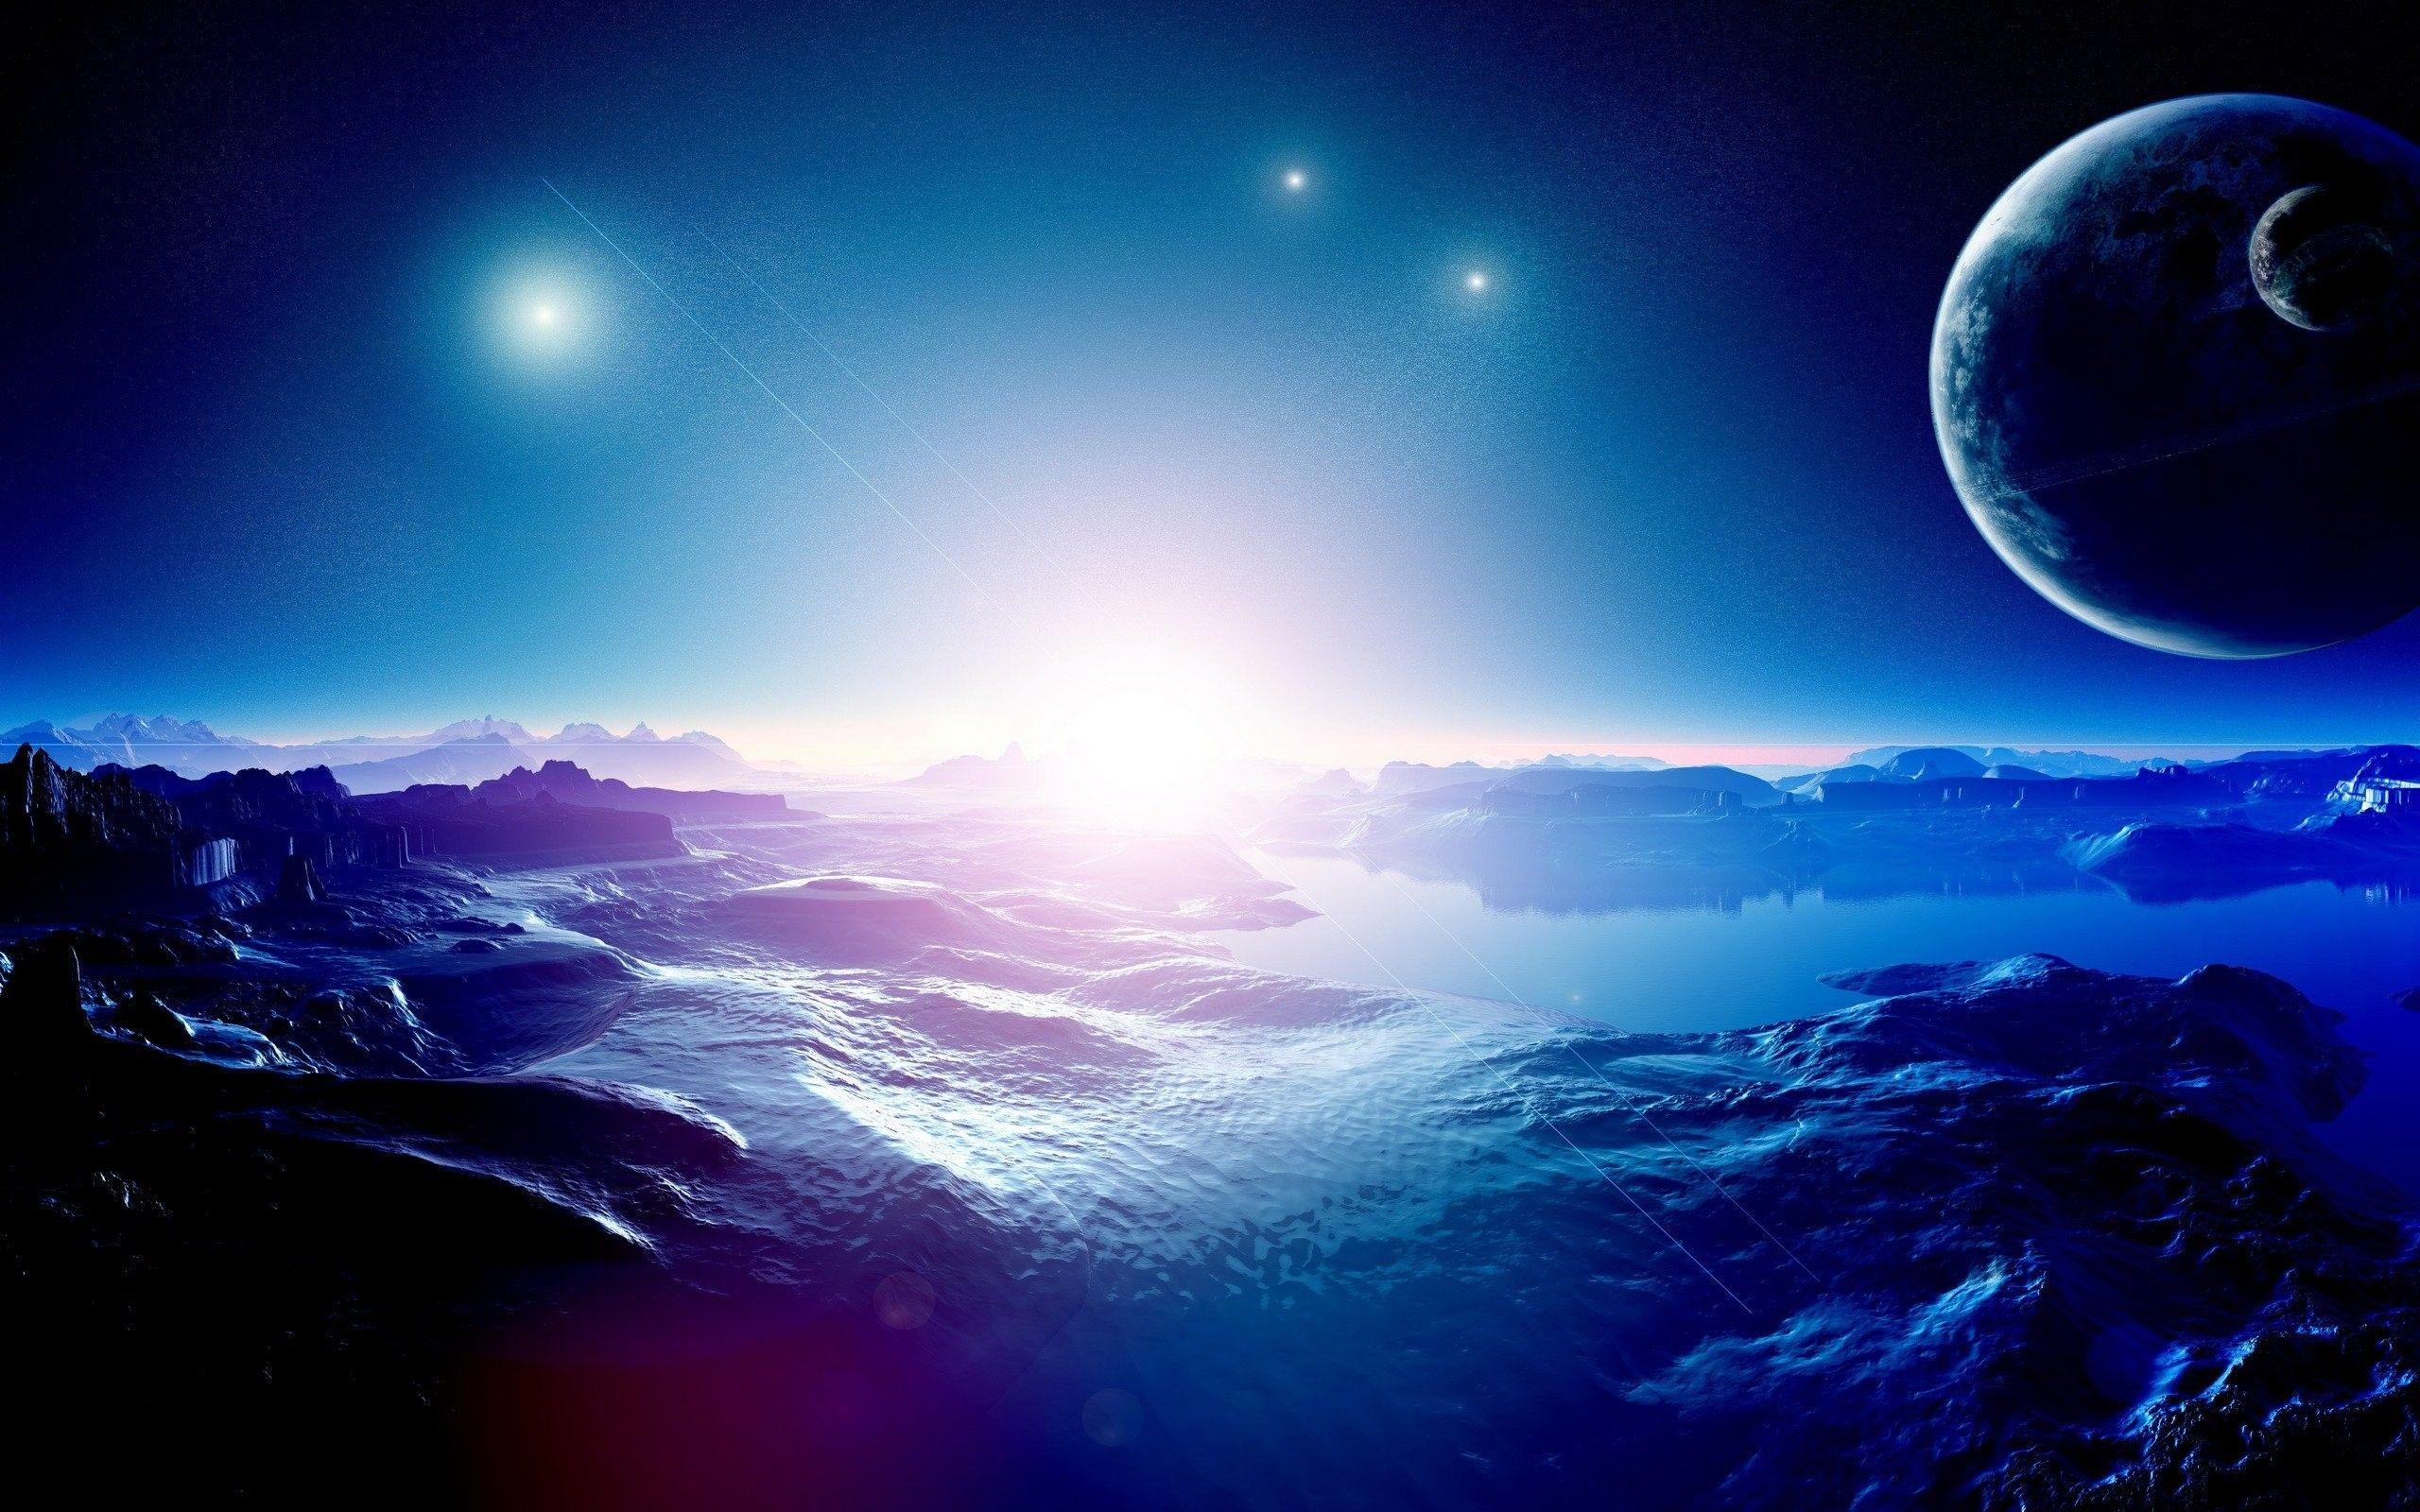 Space wallpaper 4KDownload free awesome High Resolution